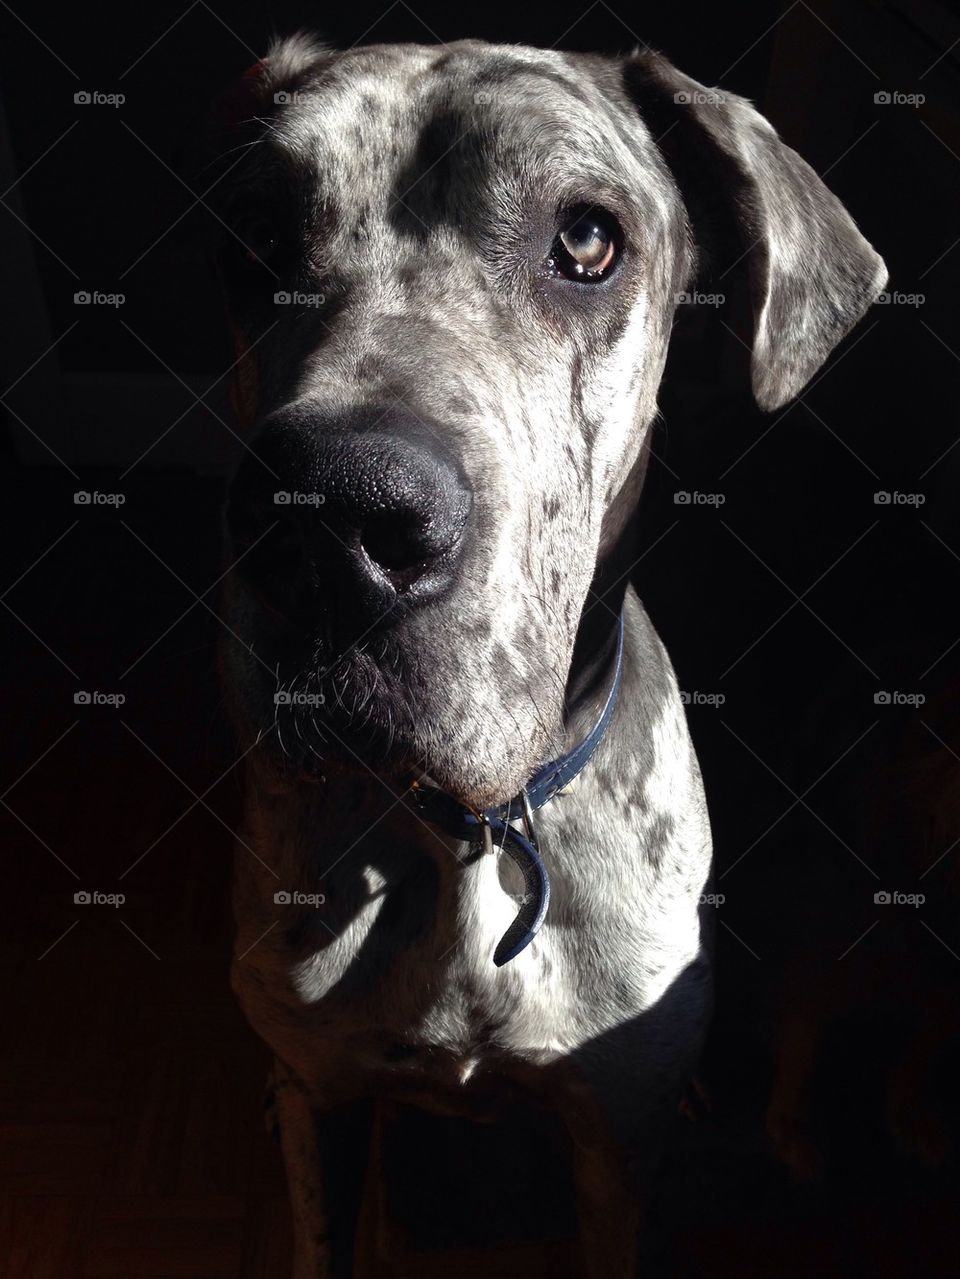 Callaway the mysterious Great Dane